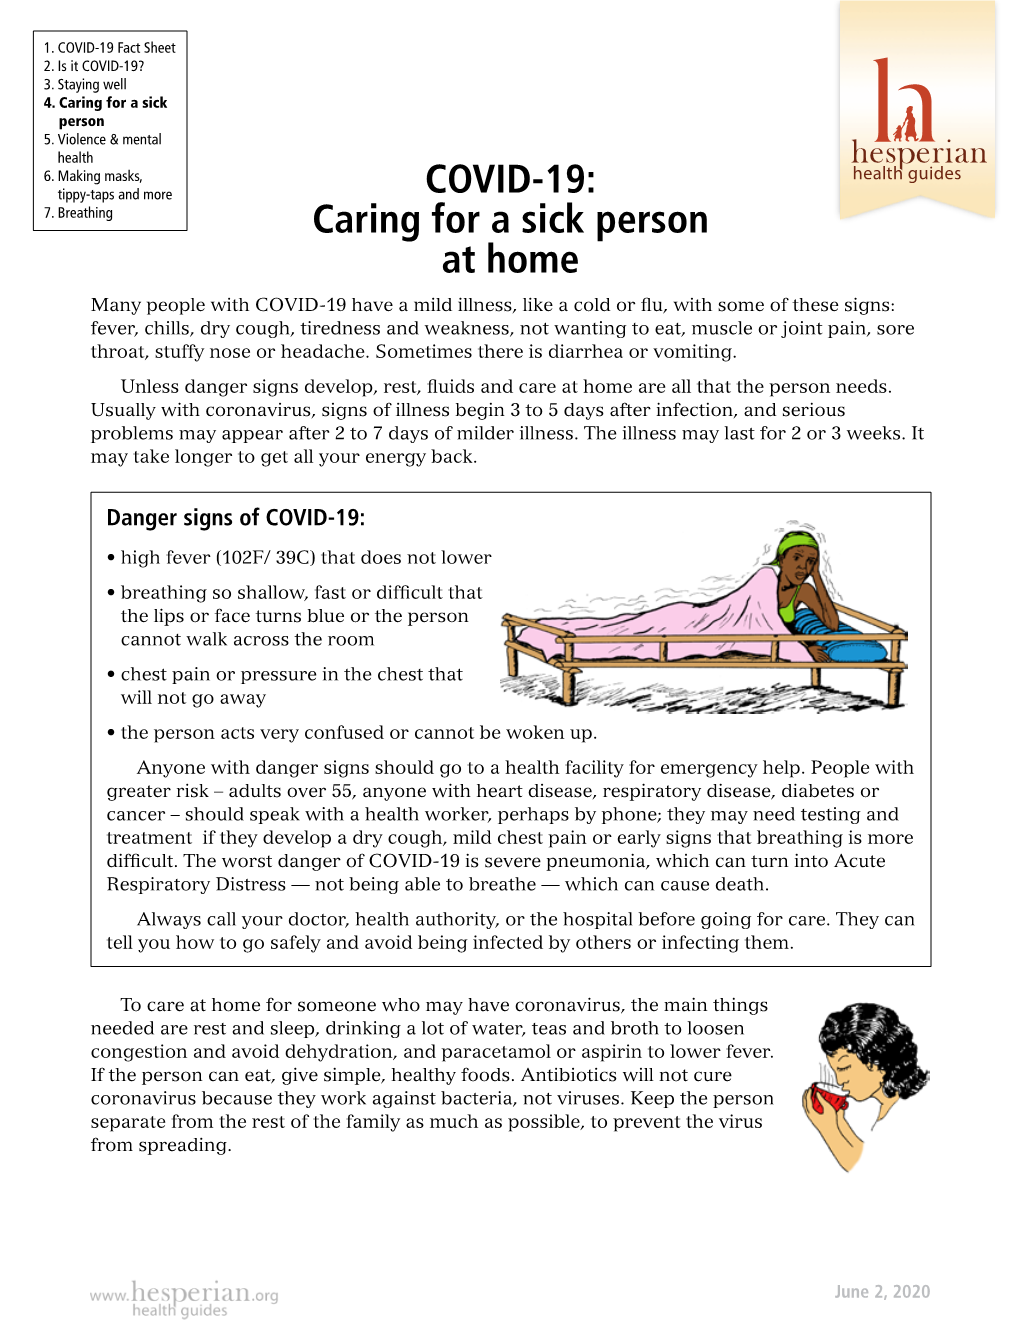 COVID-19: Caring for a Sick Person at Home